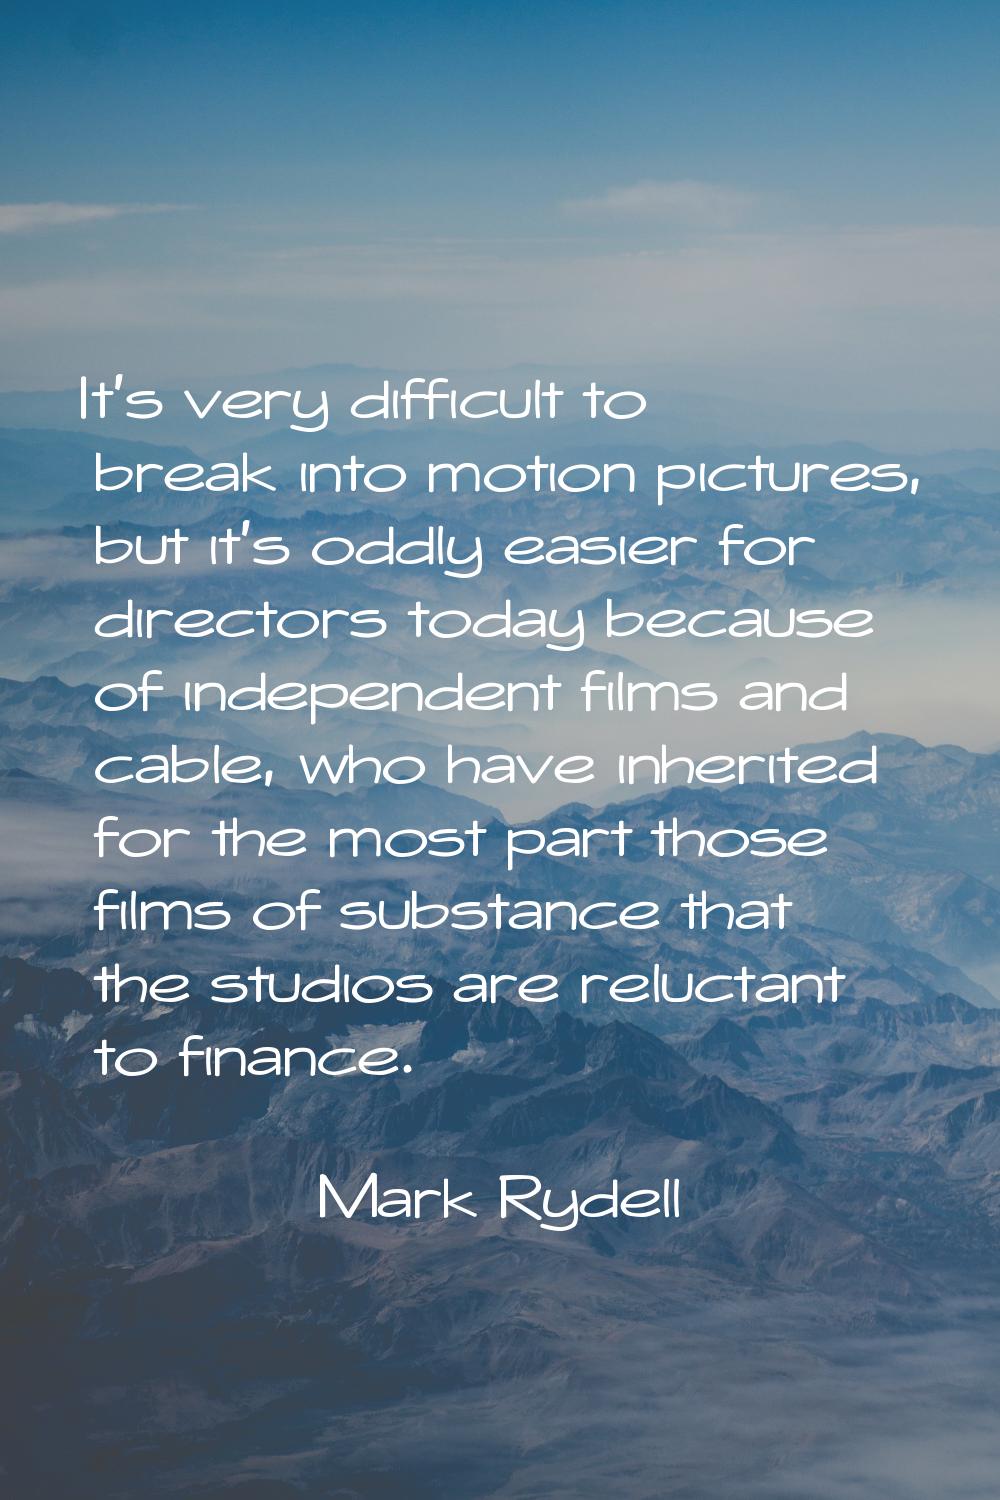 It's very difficult to break into motion pictures, but it's oddly easier for directors today becaus